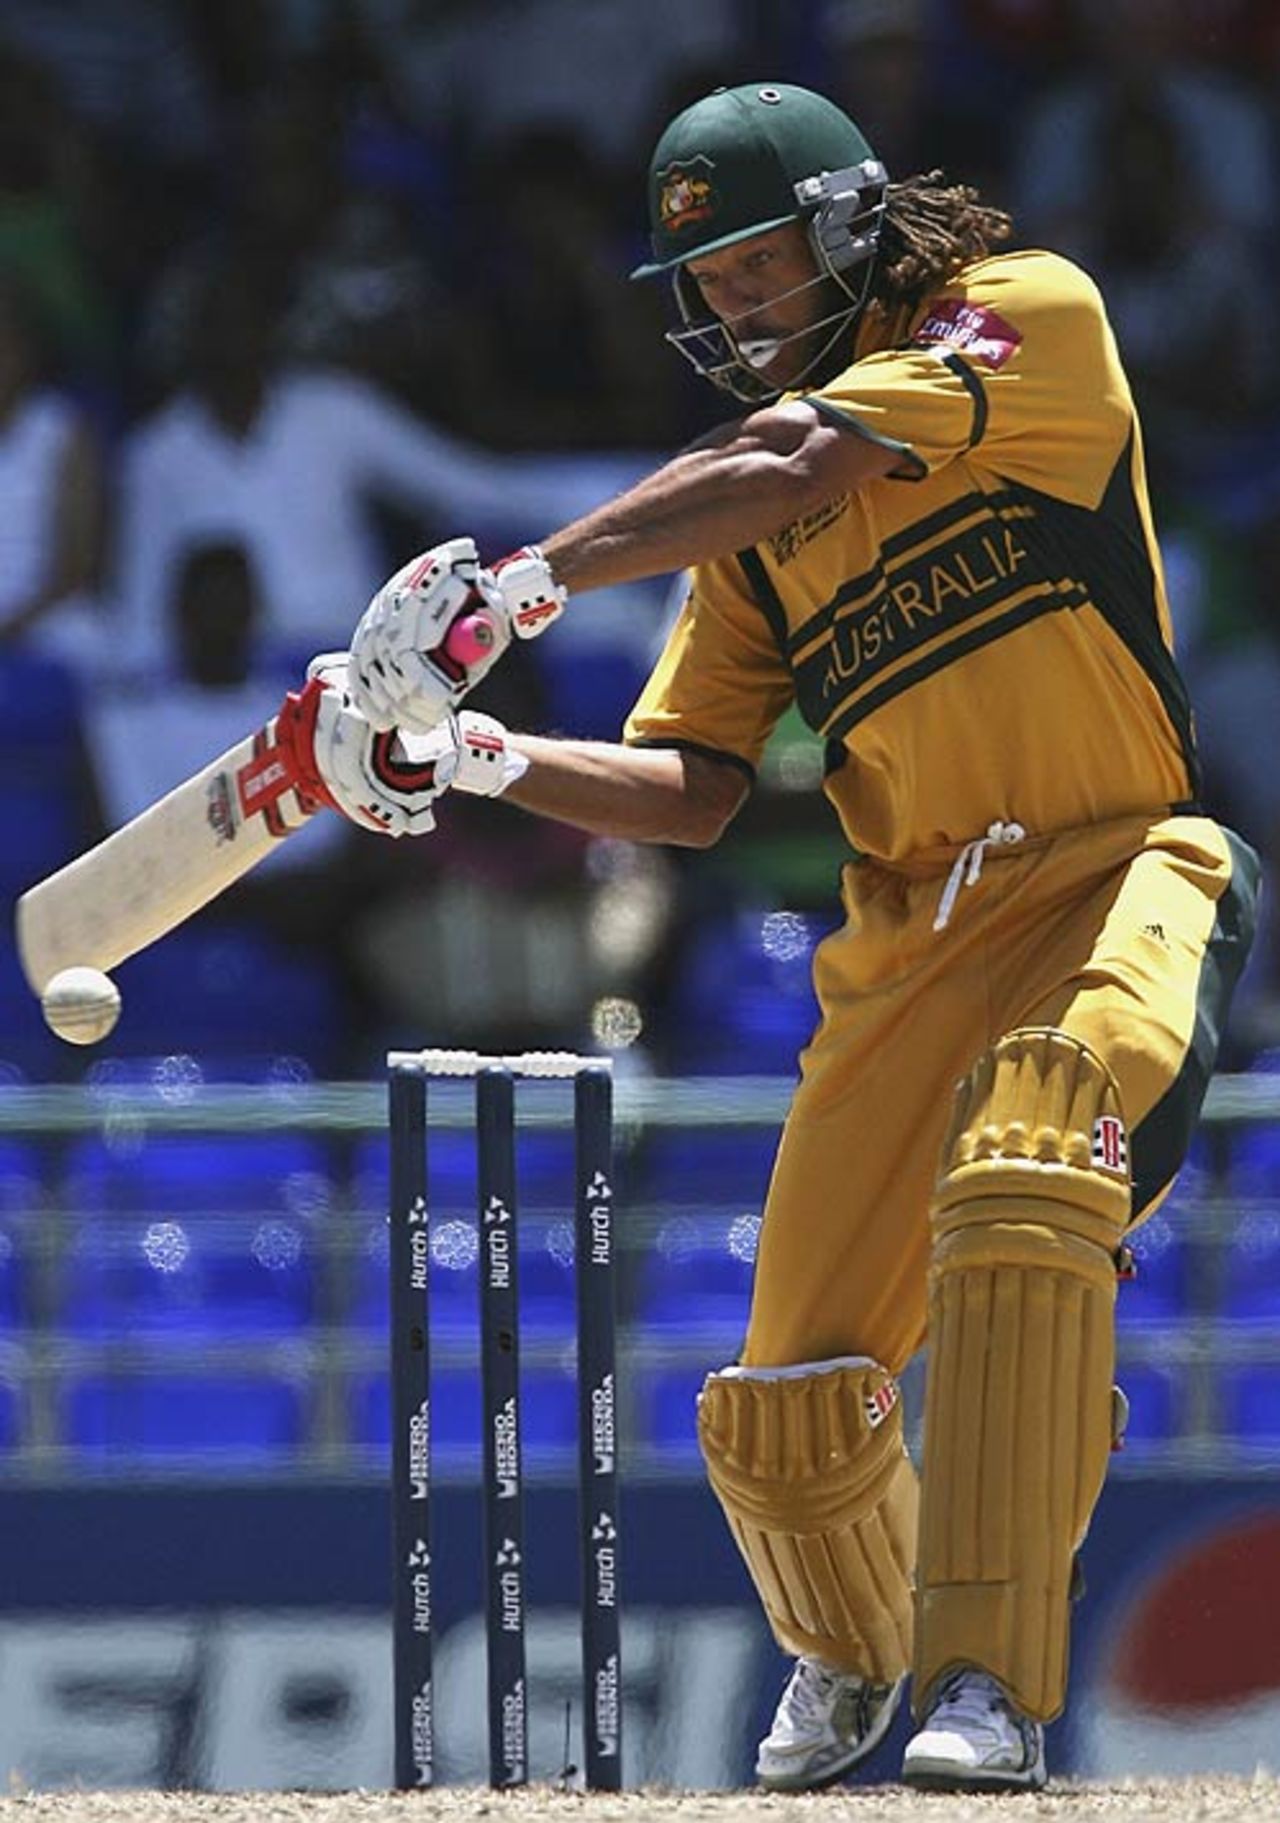 Andrew Symonds shapes to cut one away, Australia v South Africa, Group A, St Kitts, March 24, 2007